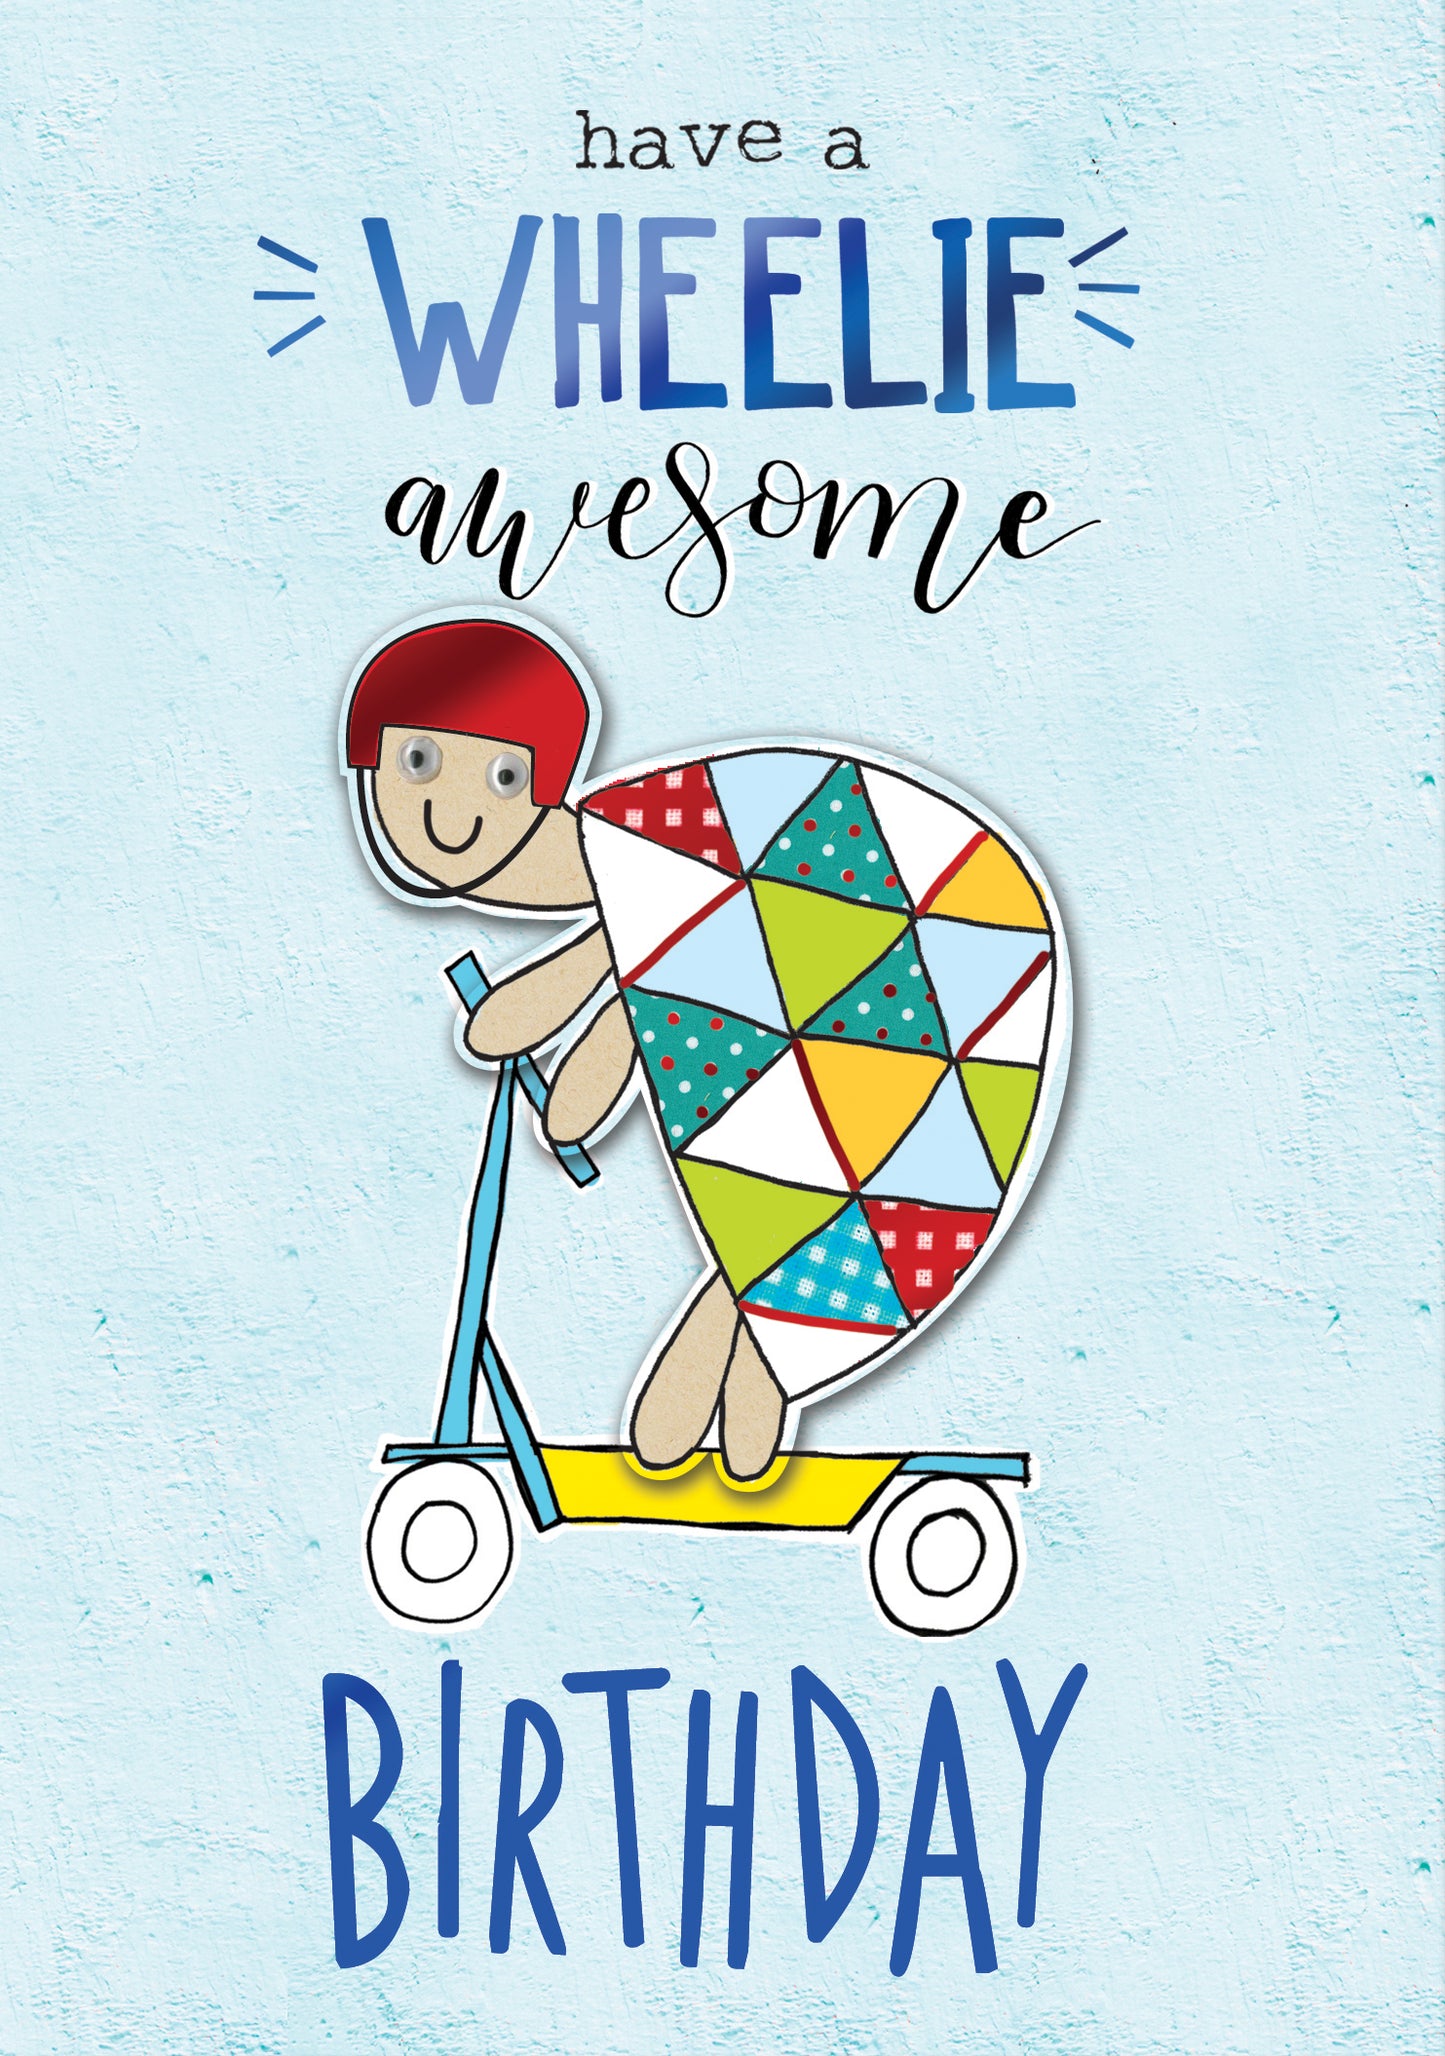 Have A Wheelie Awesome Birthday Greeting Card